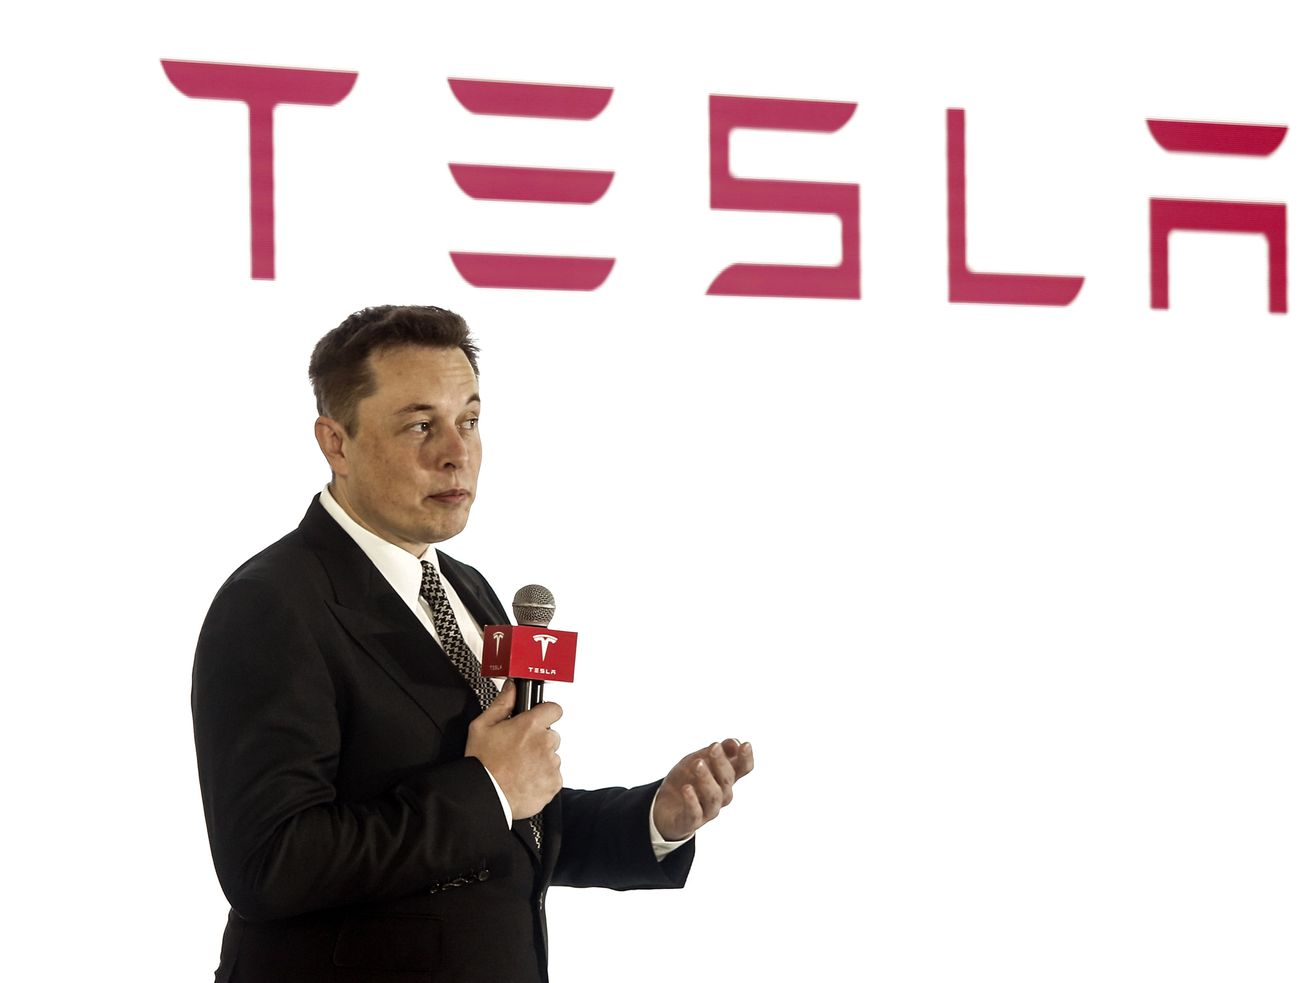 Elon Musk has Twitter and Tesla problems